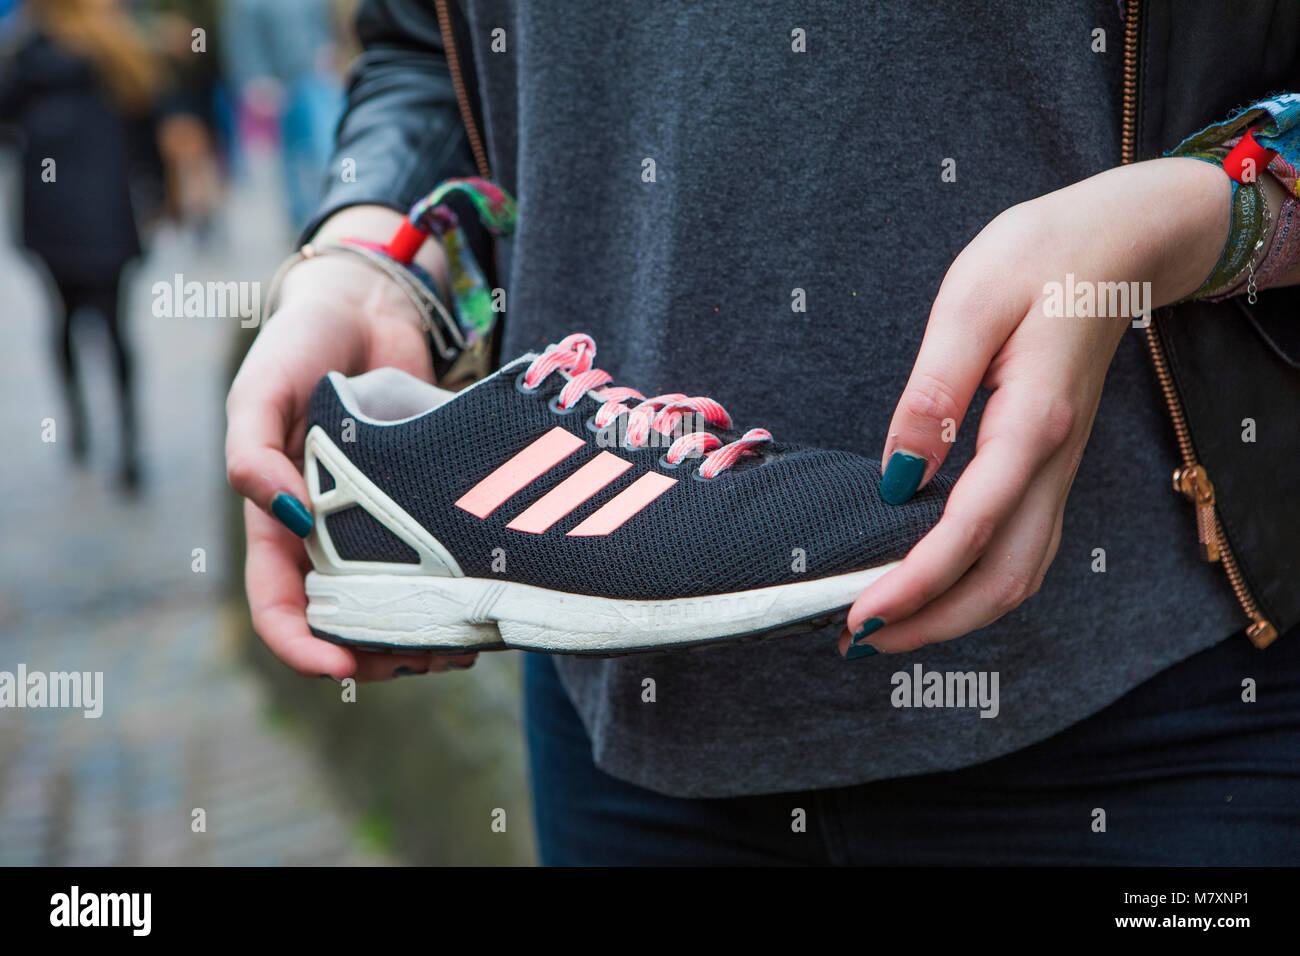 Cool vintage black Adidas trainer with pink stripes held by a woman. Stock Photo